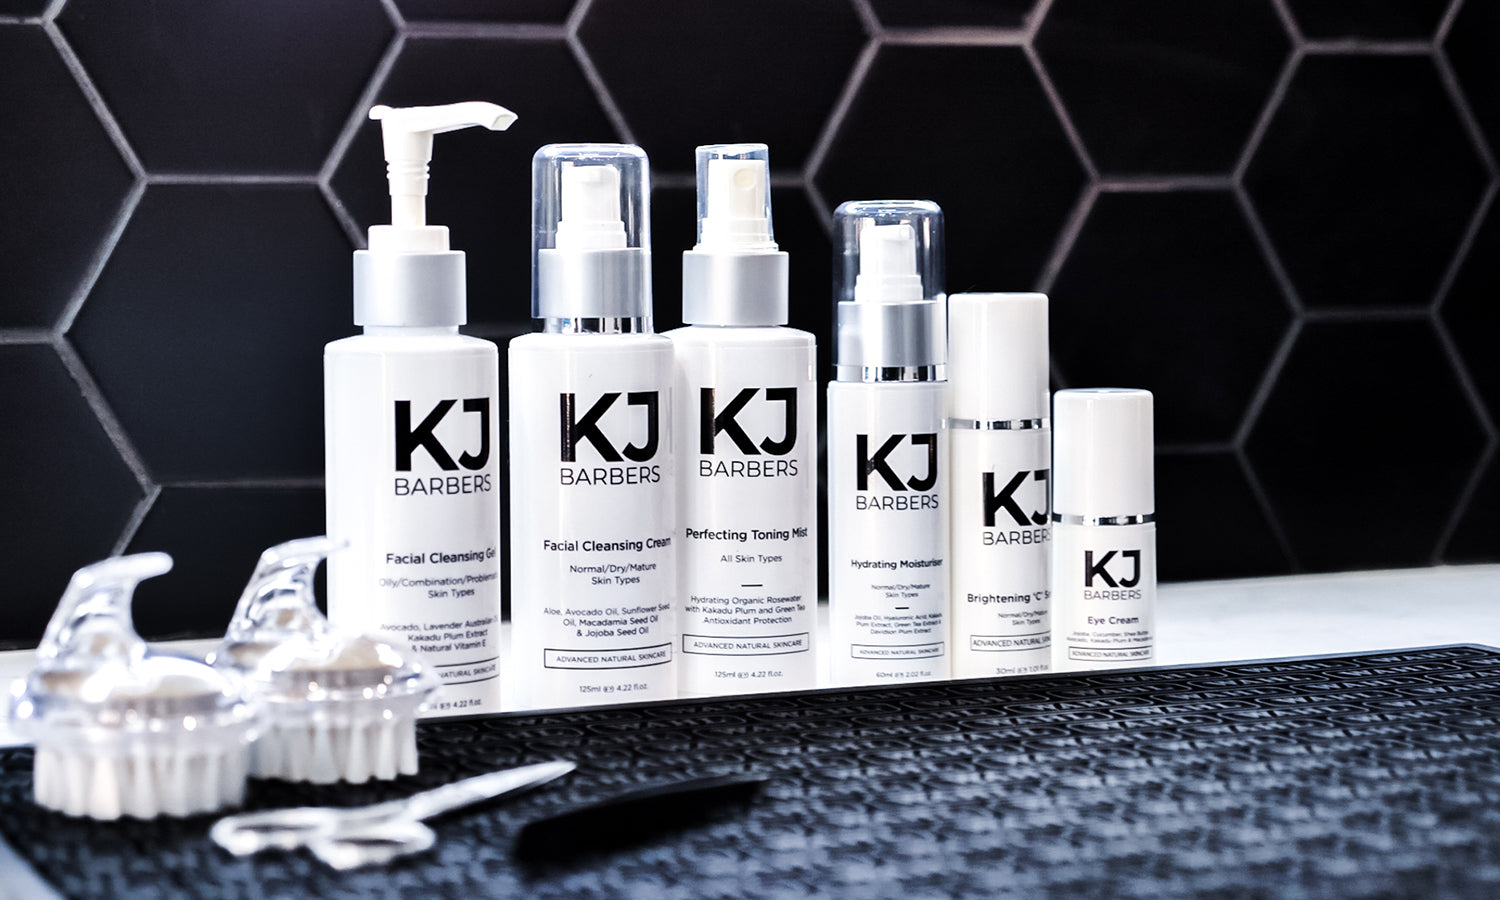 KJ Barbers own range of skincare products to keep your skin healthy